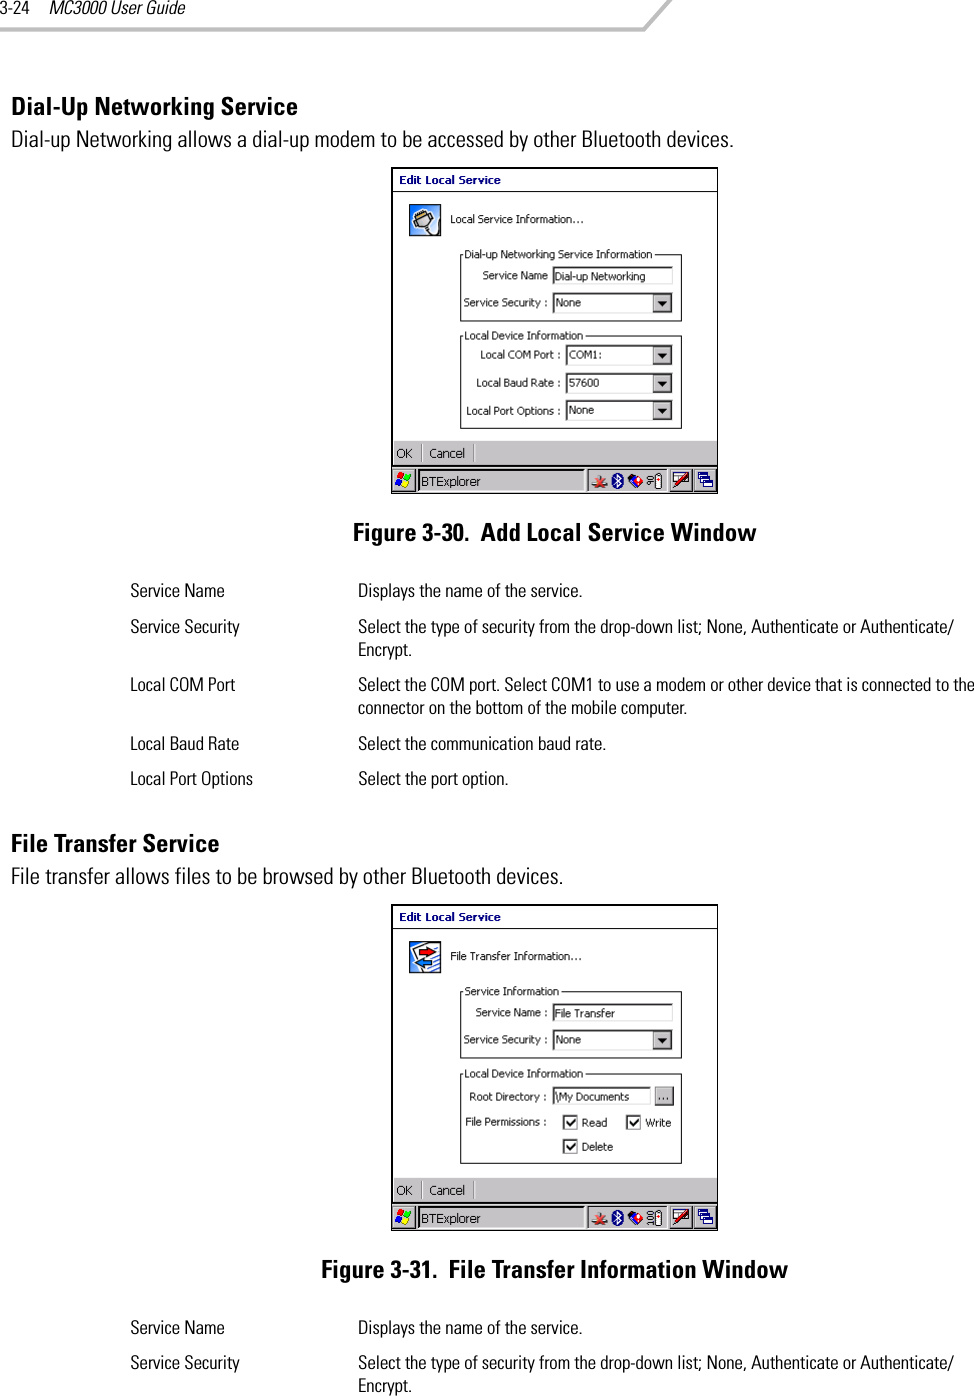 MC3000 User Guide3-24Dial-Up Networking ServiceDial-up Networking allows a dial-up modem to be accessed by other Bluetooth devices.Figure 3-30.  Add Local Service WindowFile Transfer ServiceFile transfer allows files to be browsed by other Bluetooth devices.Figure 3-31.  File Transfer Information WindowService Name Displays the name of the service.Service Security Select the type of security from the drop-down list; None, Authenticate or Authenticate/Encrypt.Local COM Port Select the COM port. Select COM1 to use a modem or other device that is connected to the connector on the bottom of the mobile computer.Local Baud Rate Select the communication baud rate.Local Port Options Select the port option.Service Name Displays the name of the service.Service Security Select the type of security from the drop-down list; None, Authenticate or Authenticate/Encrypt.